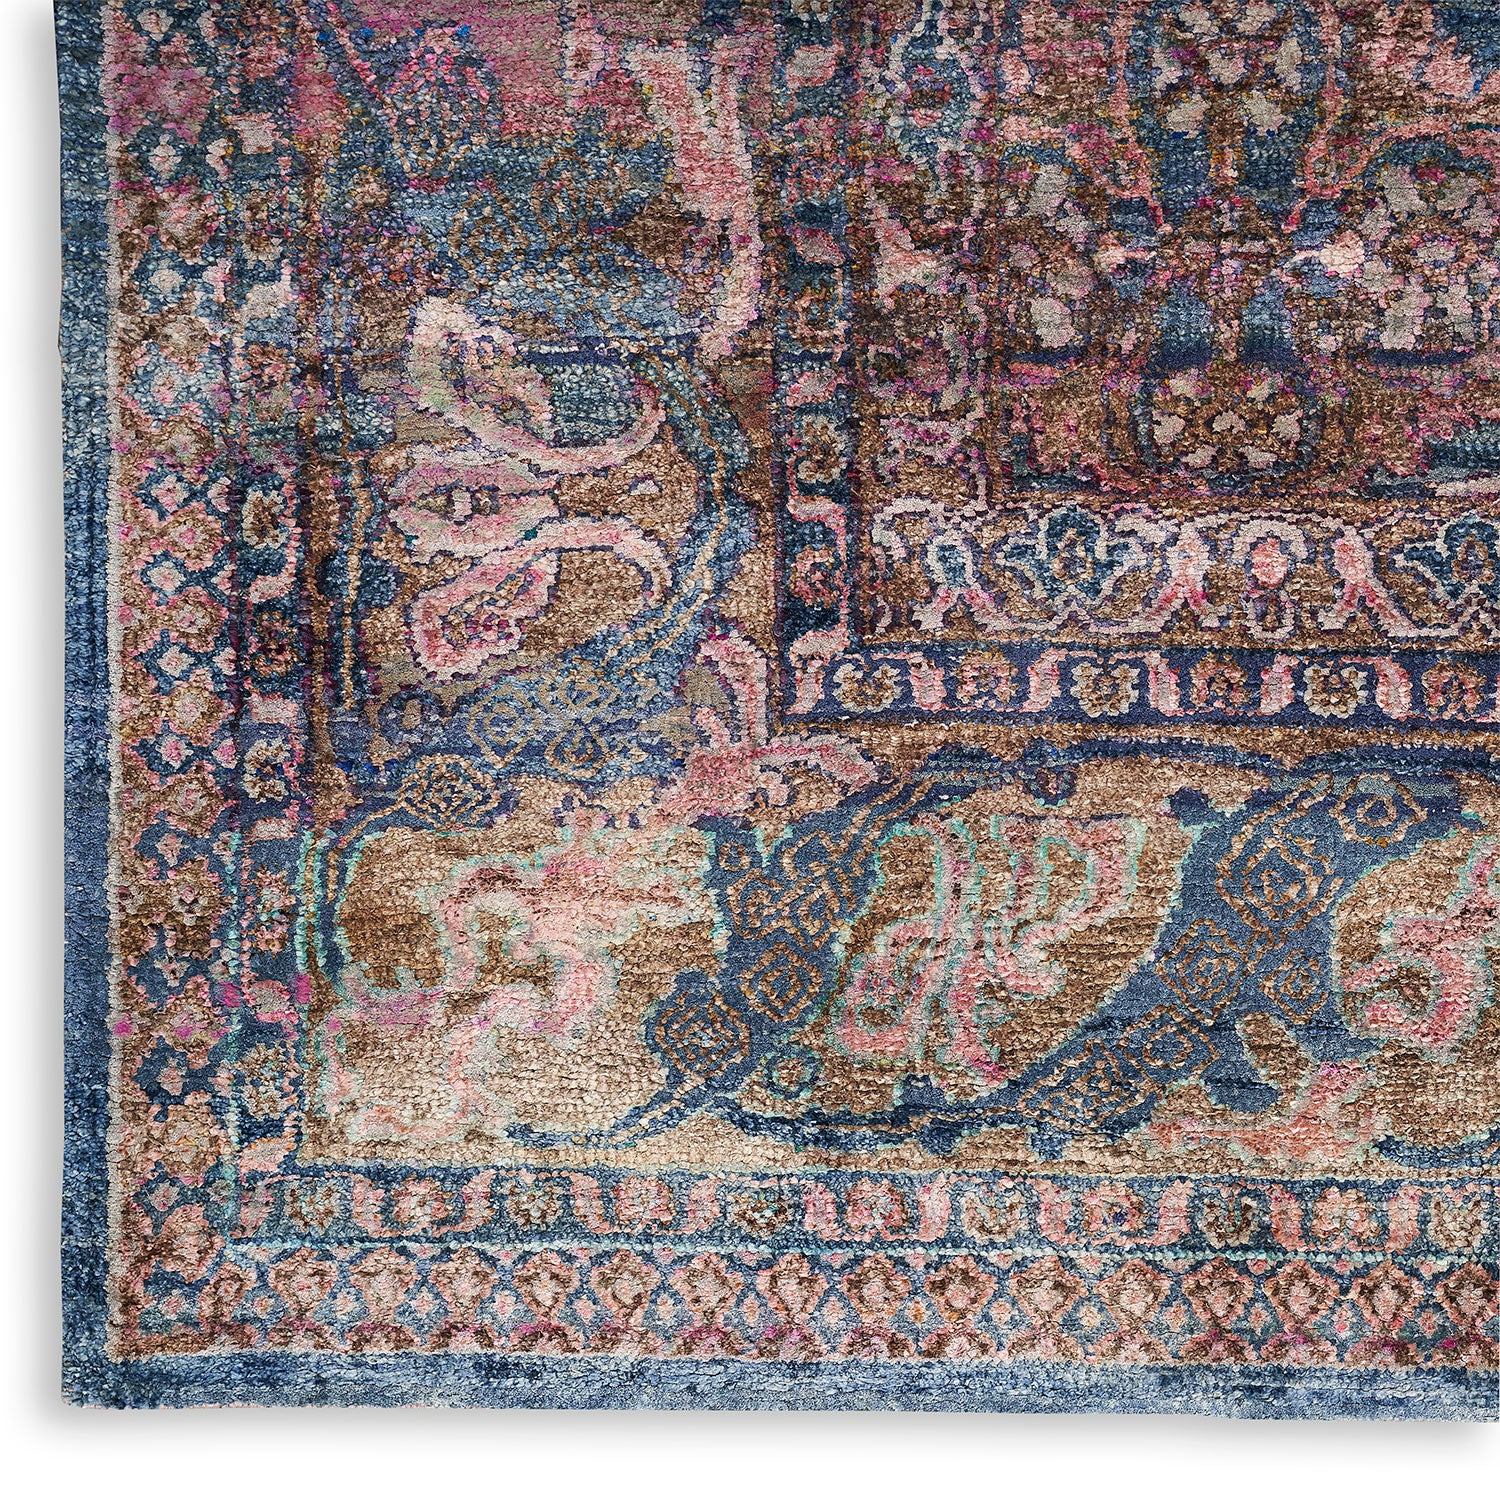 Close-up of an intricately patterned traditional rug featuring vibrant colors.